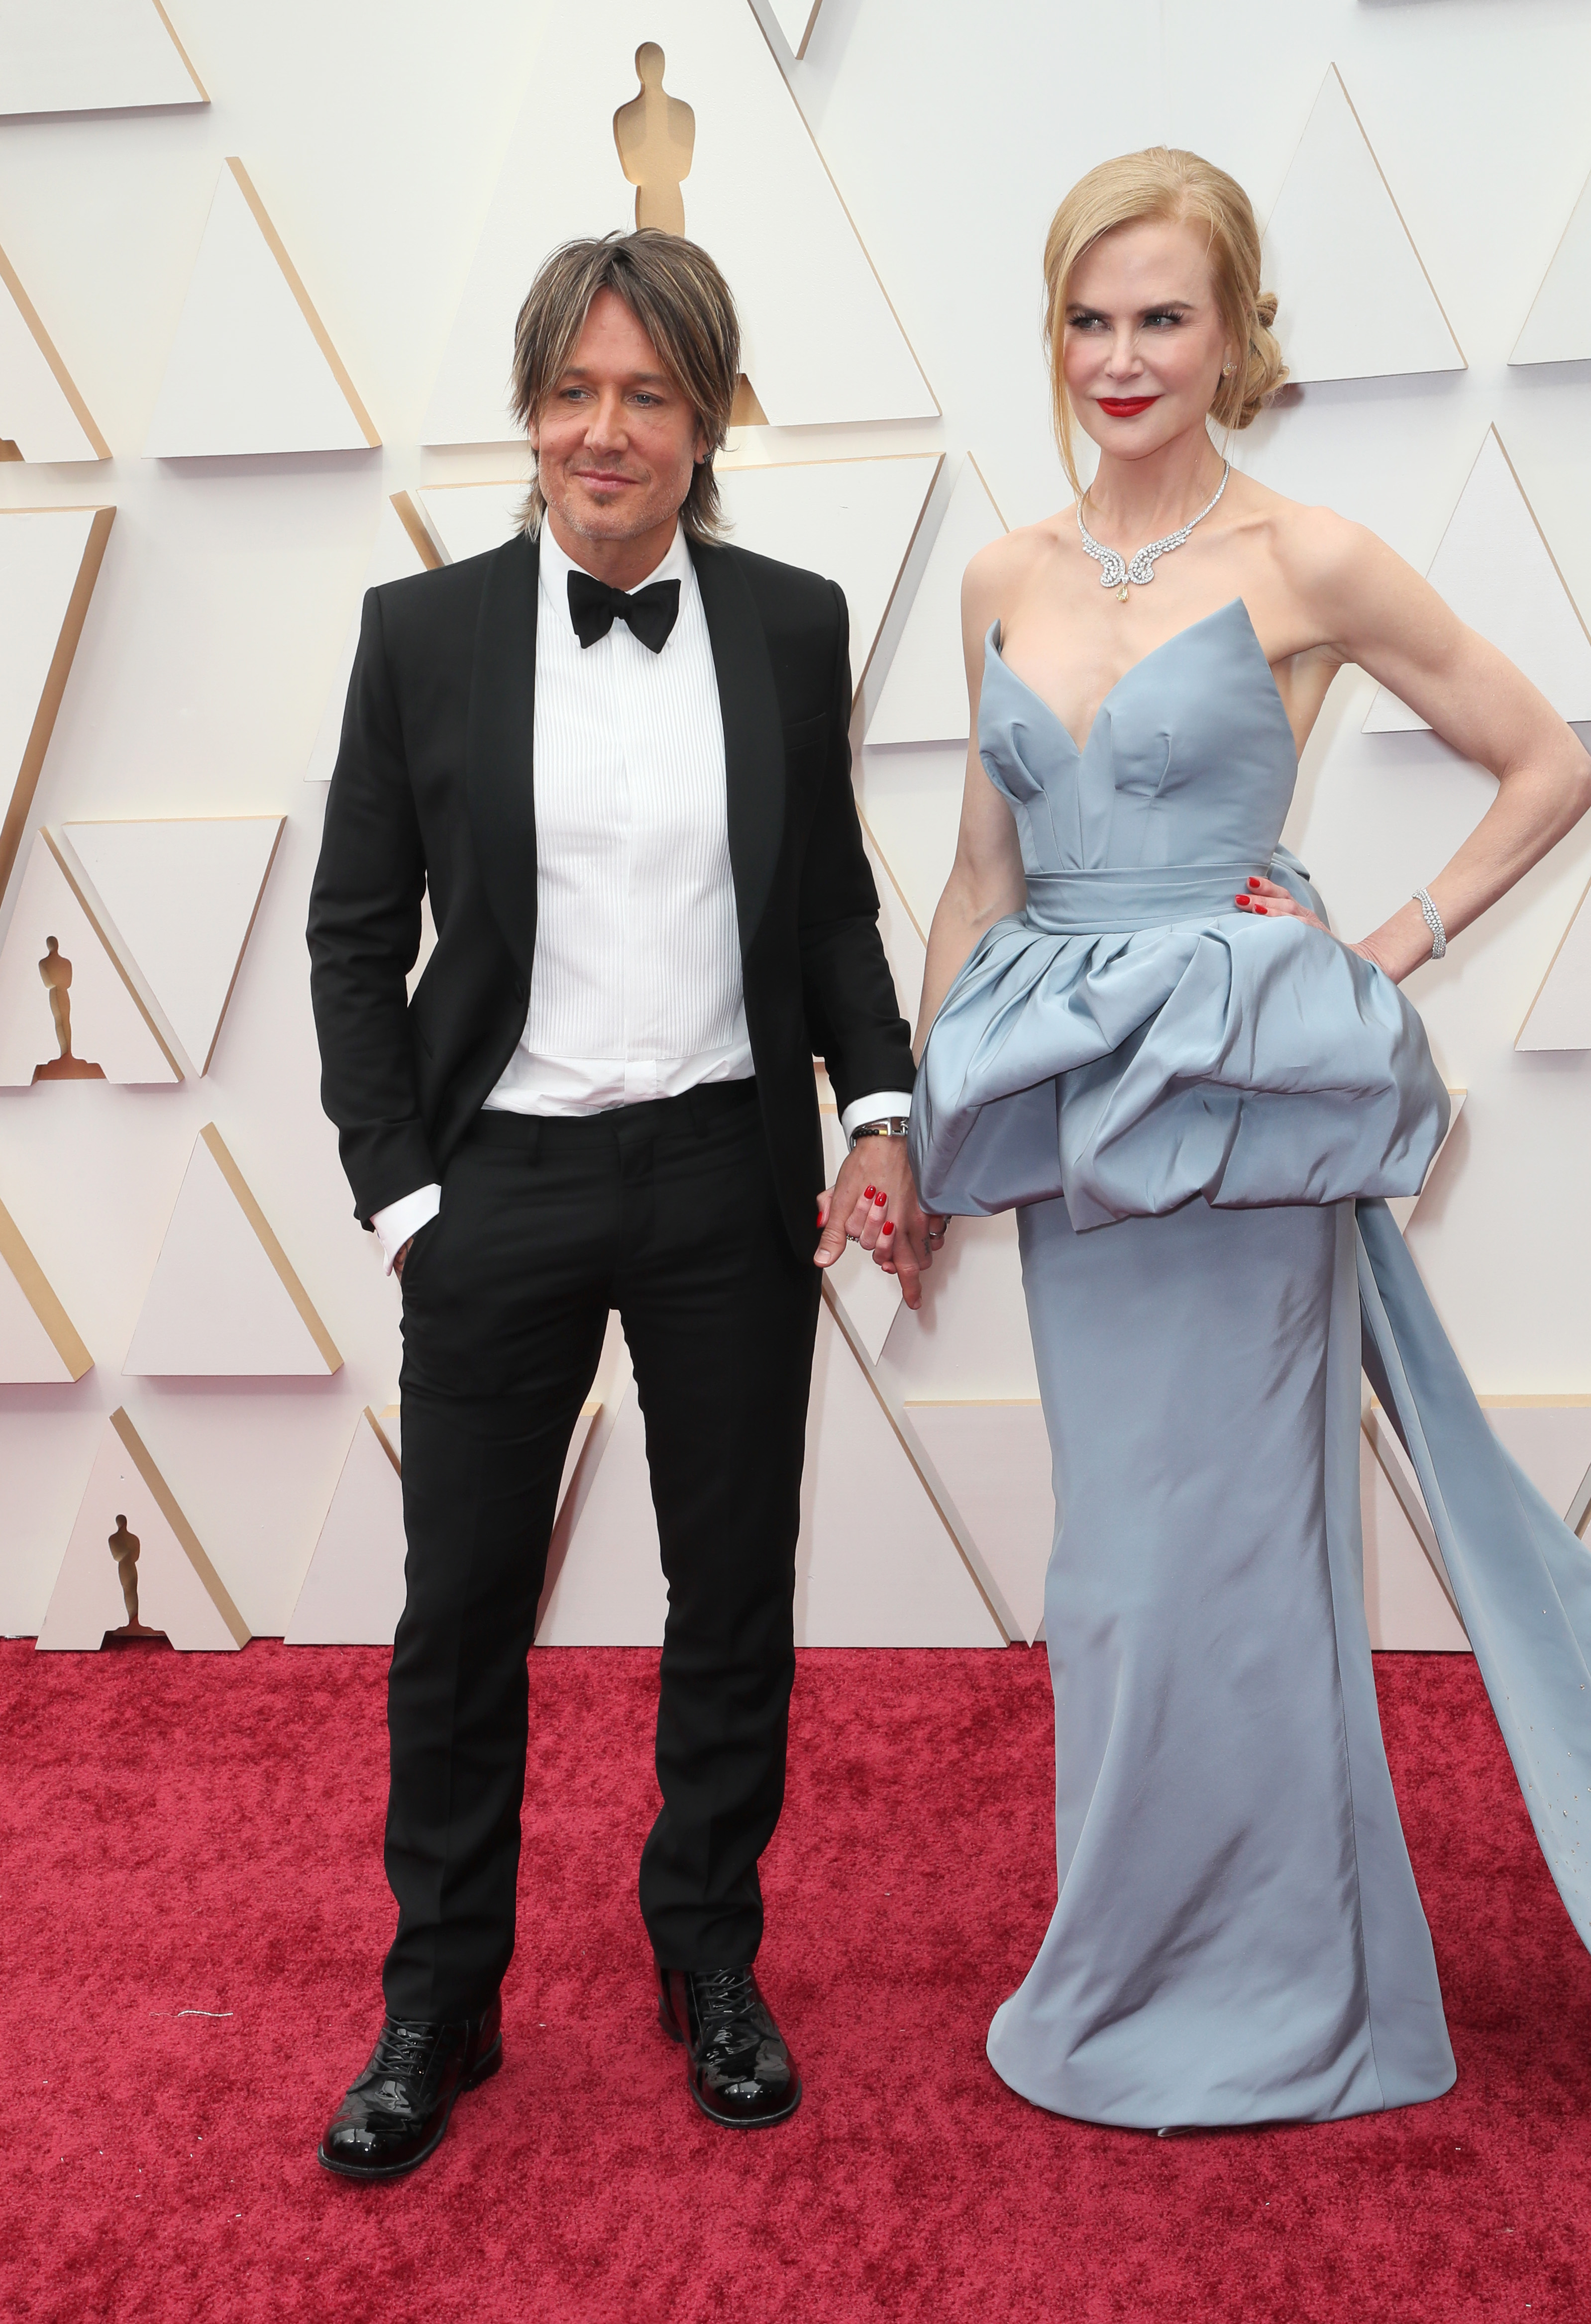 Keith Urban and Nicole Kidman at the 94th Annual Academy Awards in Hollywood, California on March 27, 2022 | Source: Getty Images